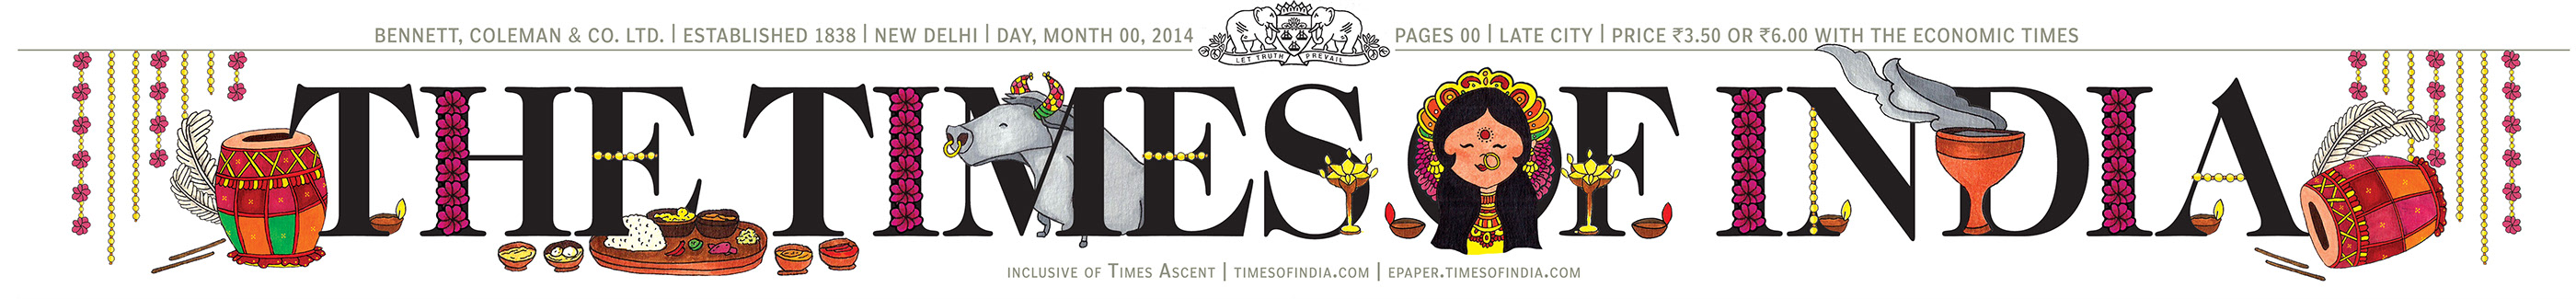 The Times of India masthead from September 28, 2017